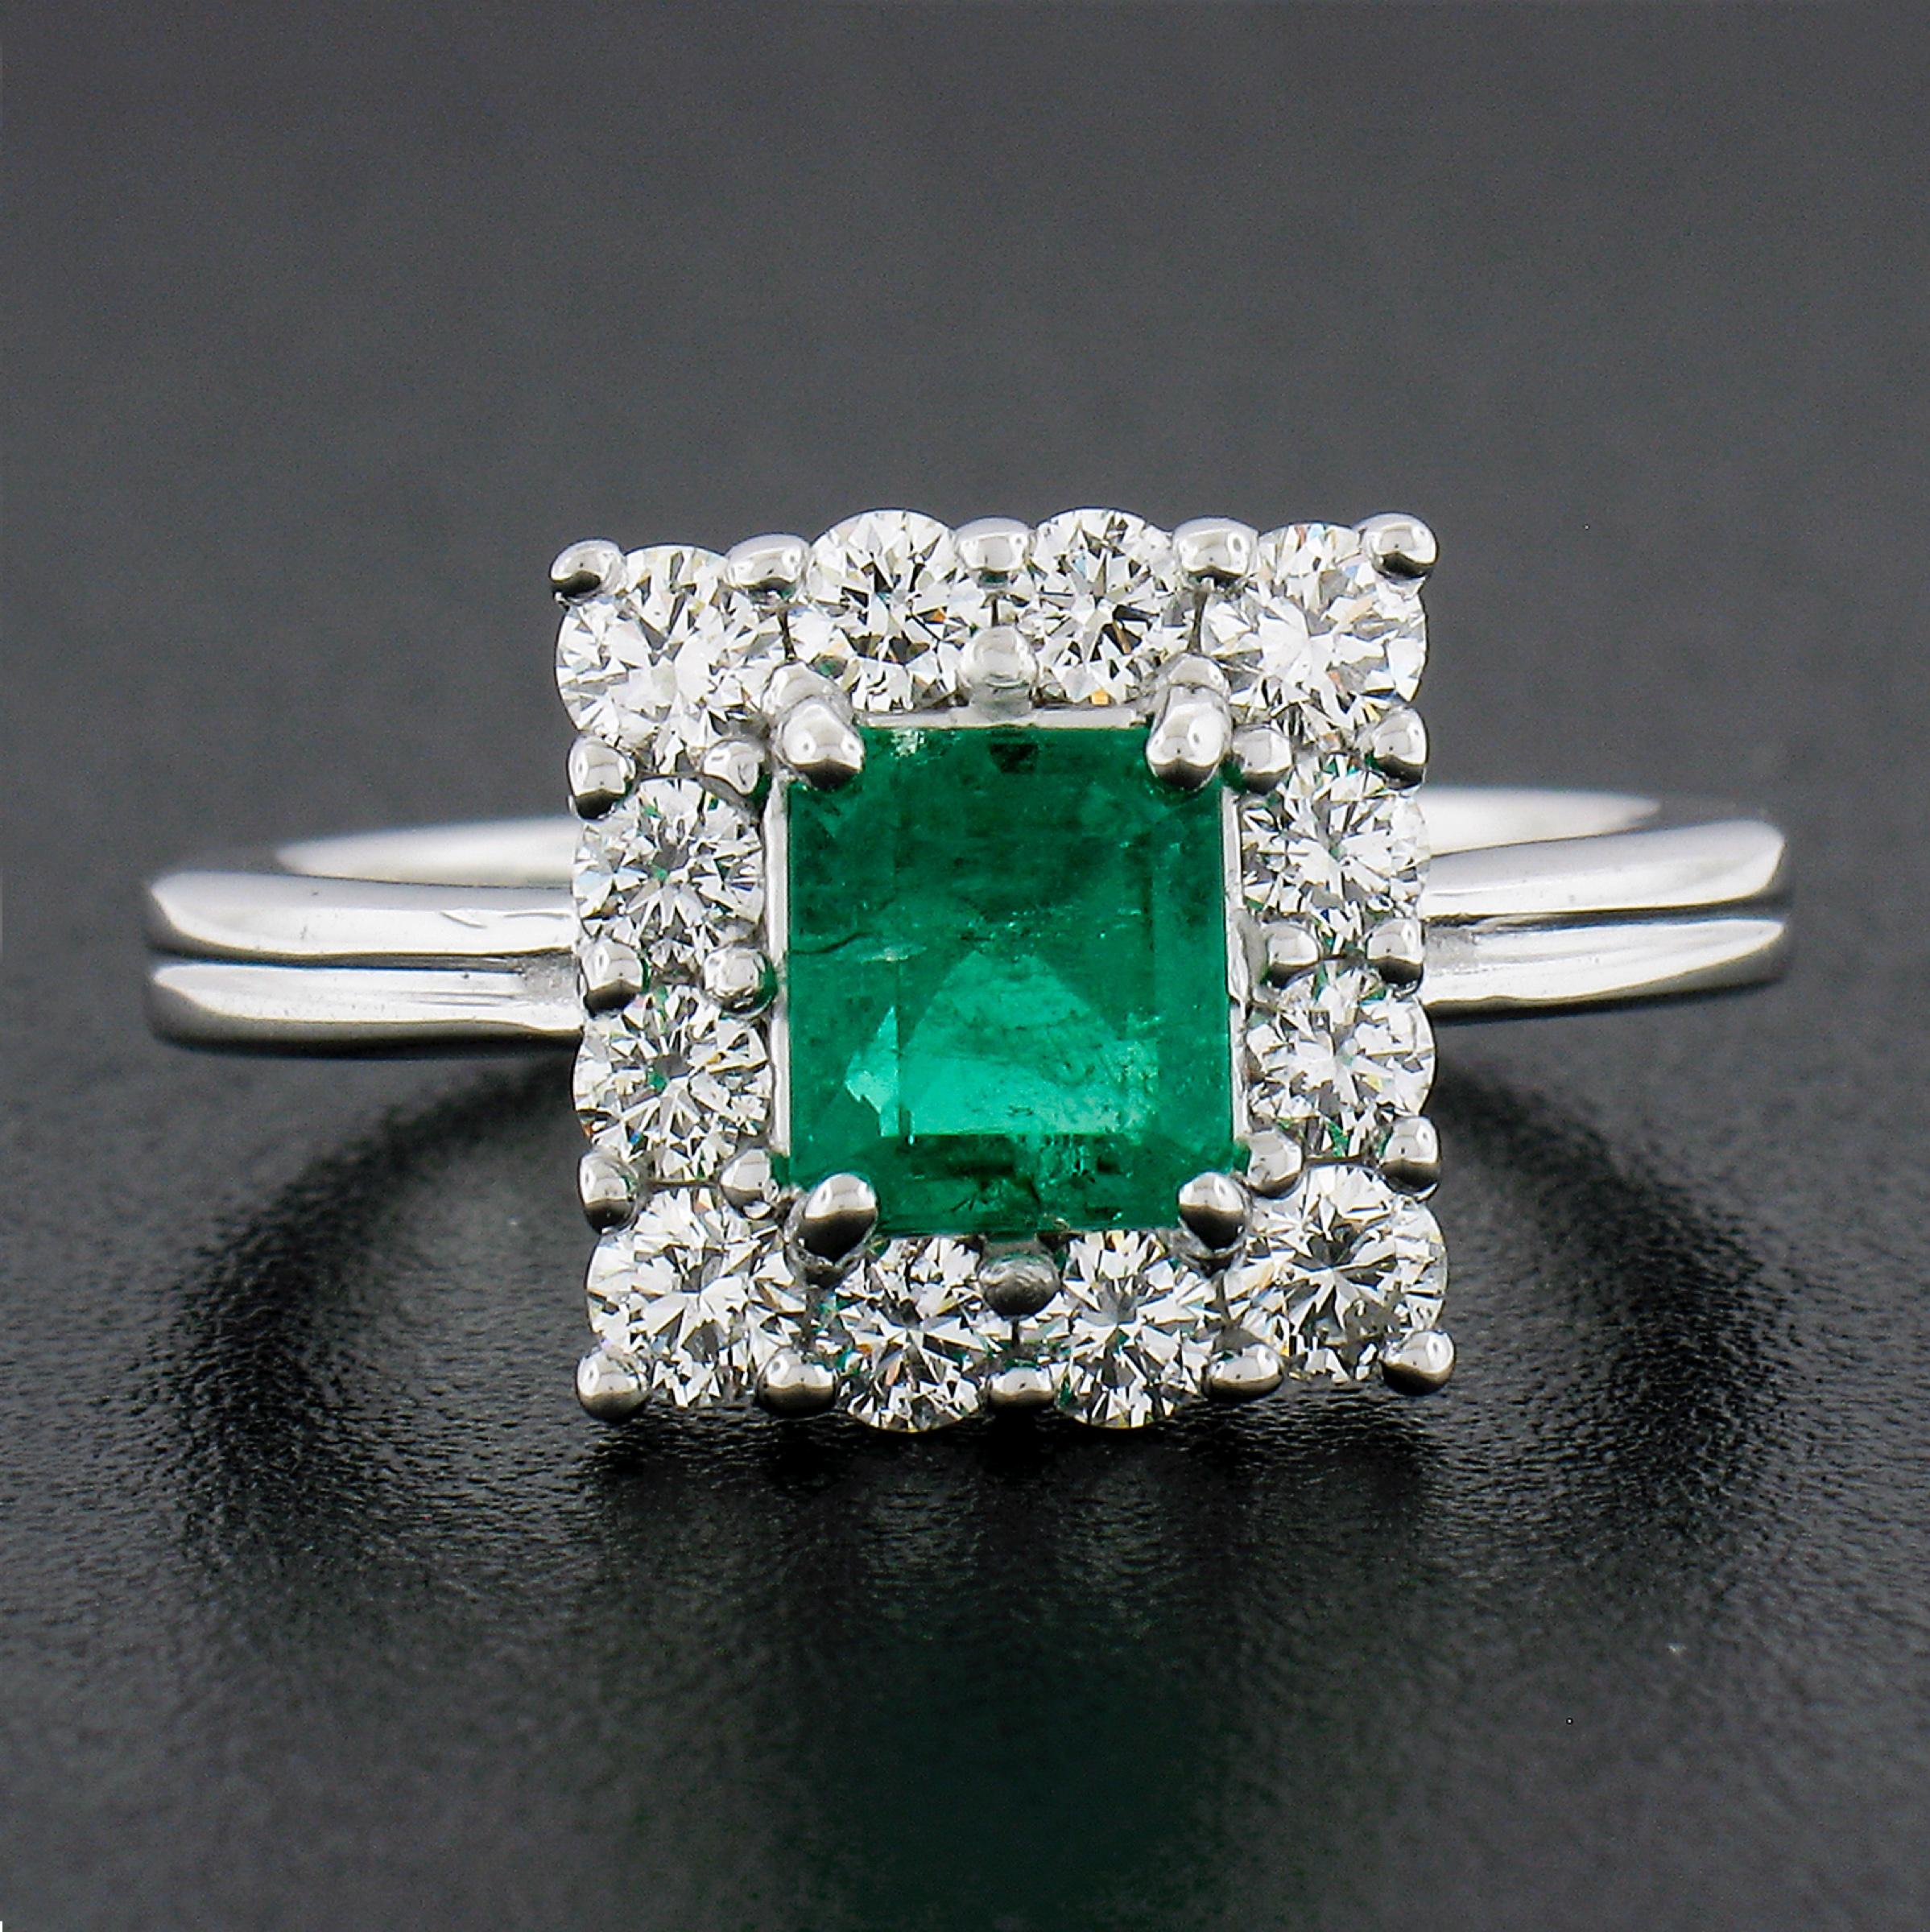 --Stone(s):--
(1) Natural Genuine Emerald - Prong Set - Green Color w/ Oil and Natural Inclusions - 0.82ct (exact - certified)
** See Certification Details Below for Complete Info **
(12) Natural Genuine Diamonds - Round Brilliant Cut - Shared Prong